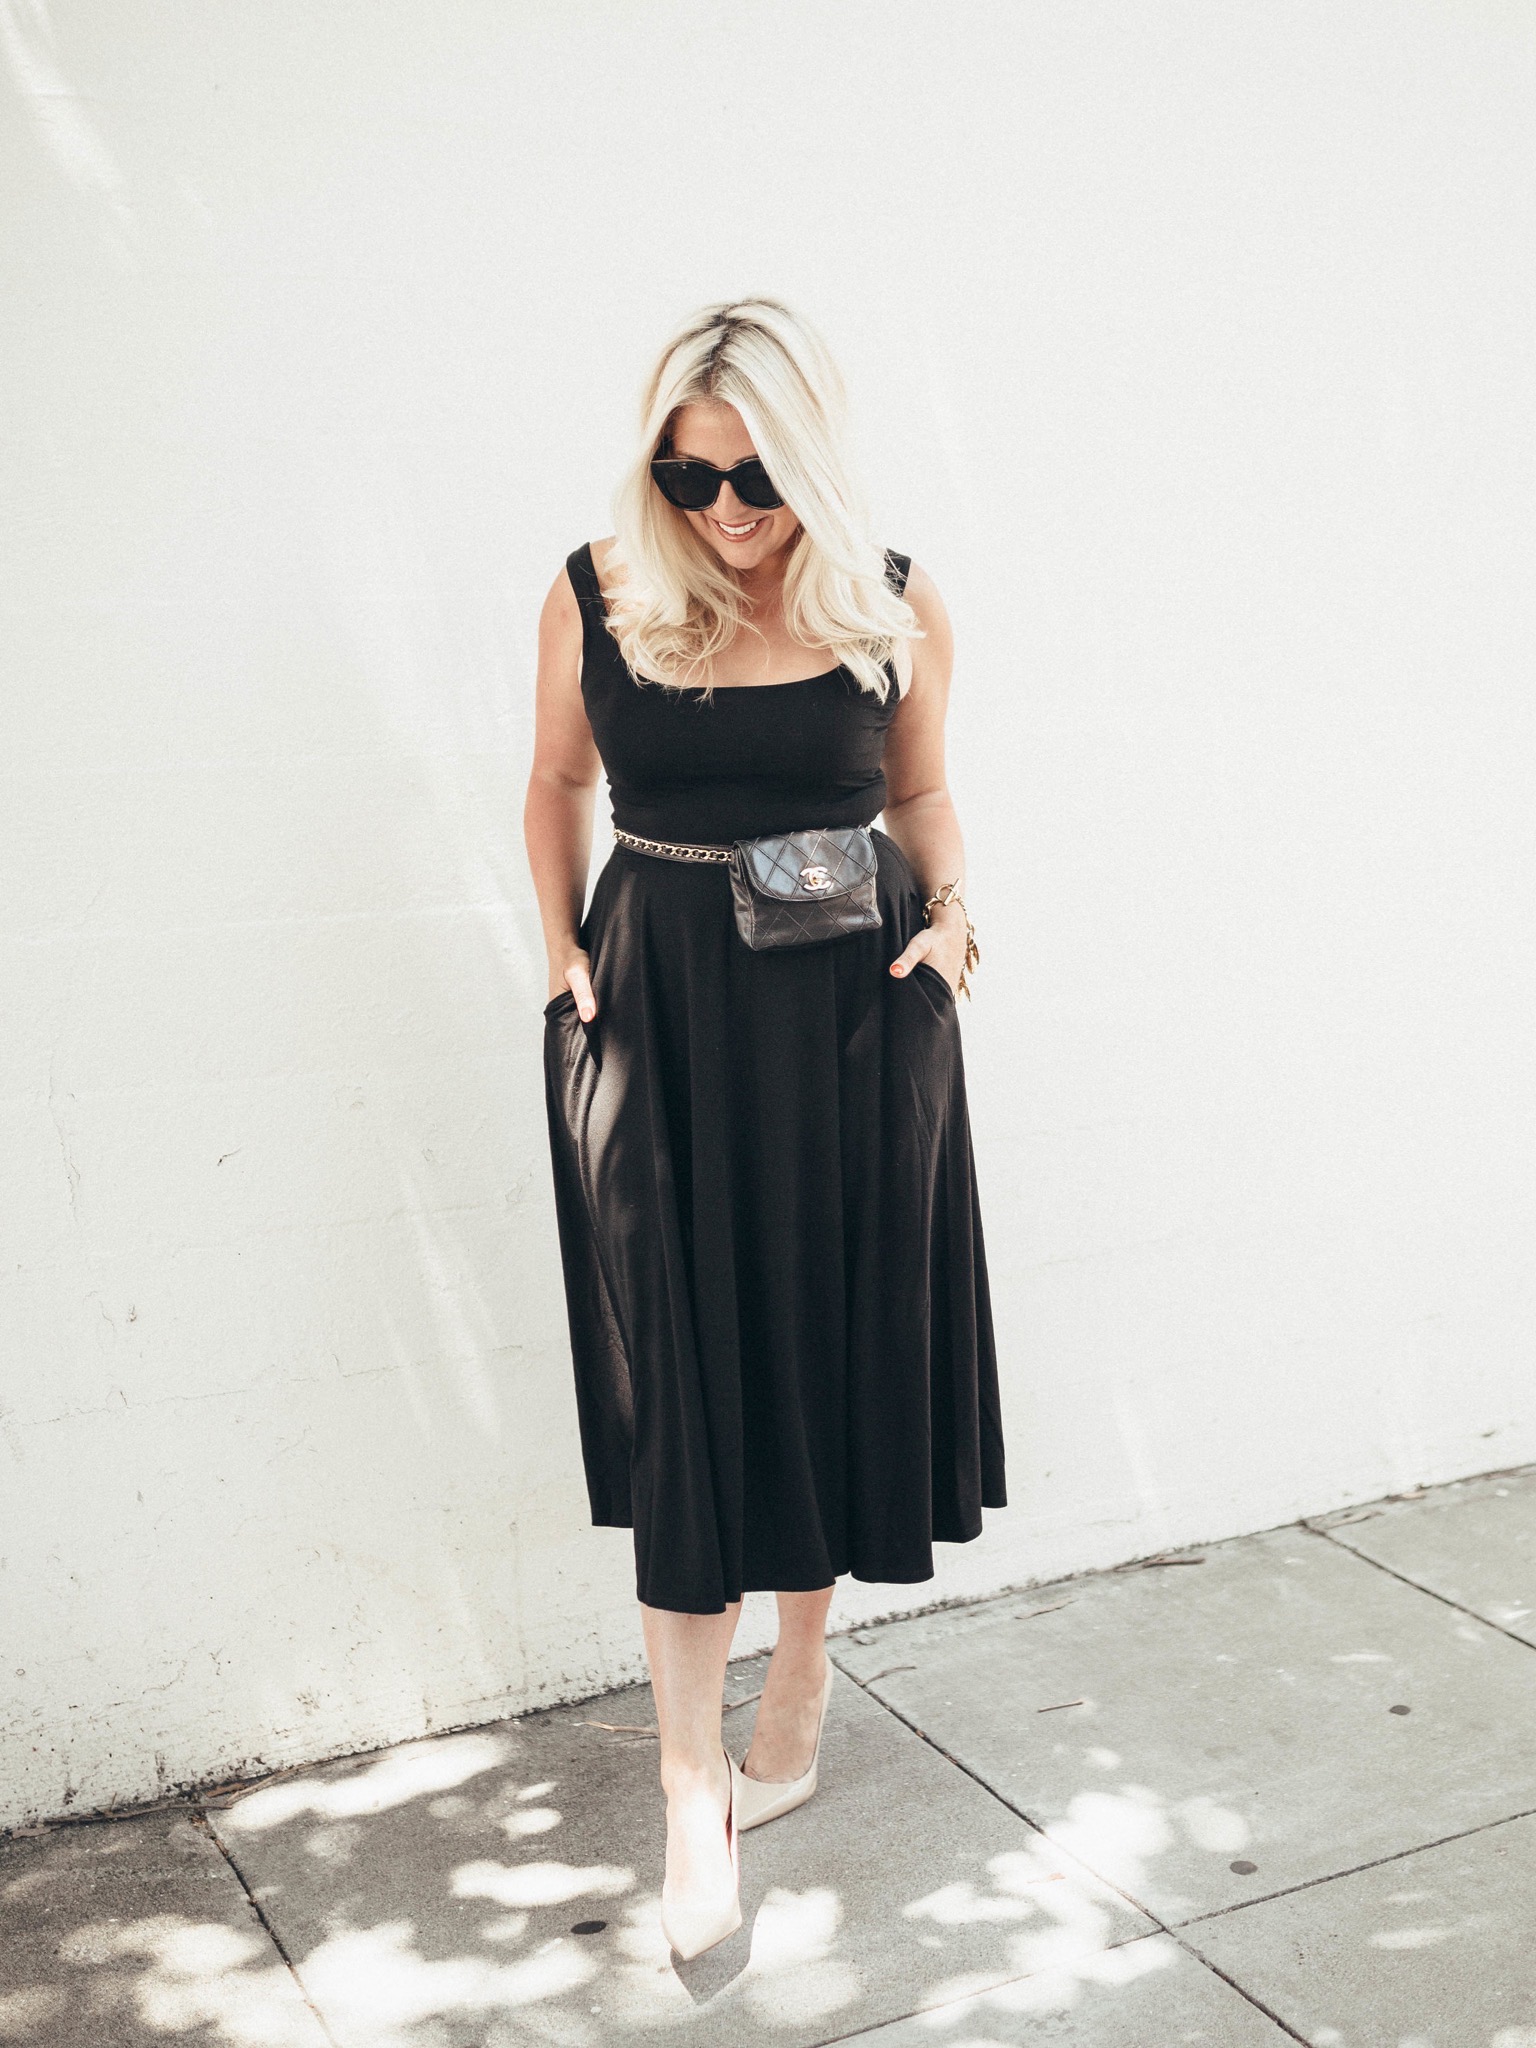 Fashion blogger KatWalkSF wearing the Reformation Rou Midi Fit & Flare Dress, Reformation Dresses for Curvy Girls